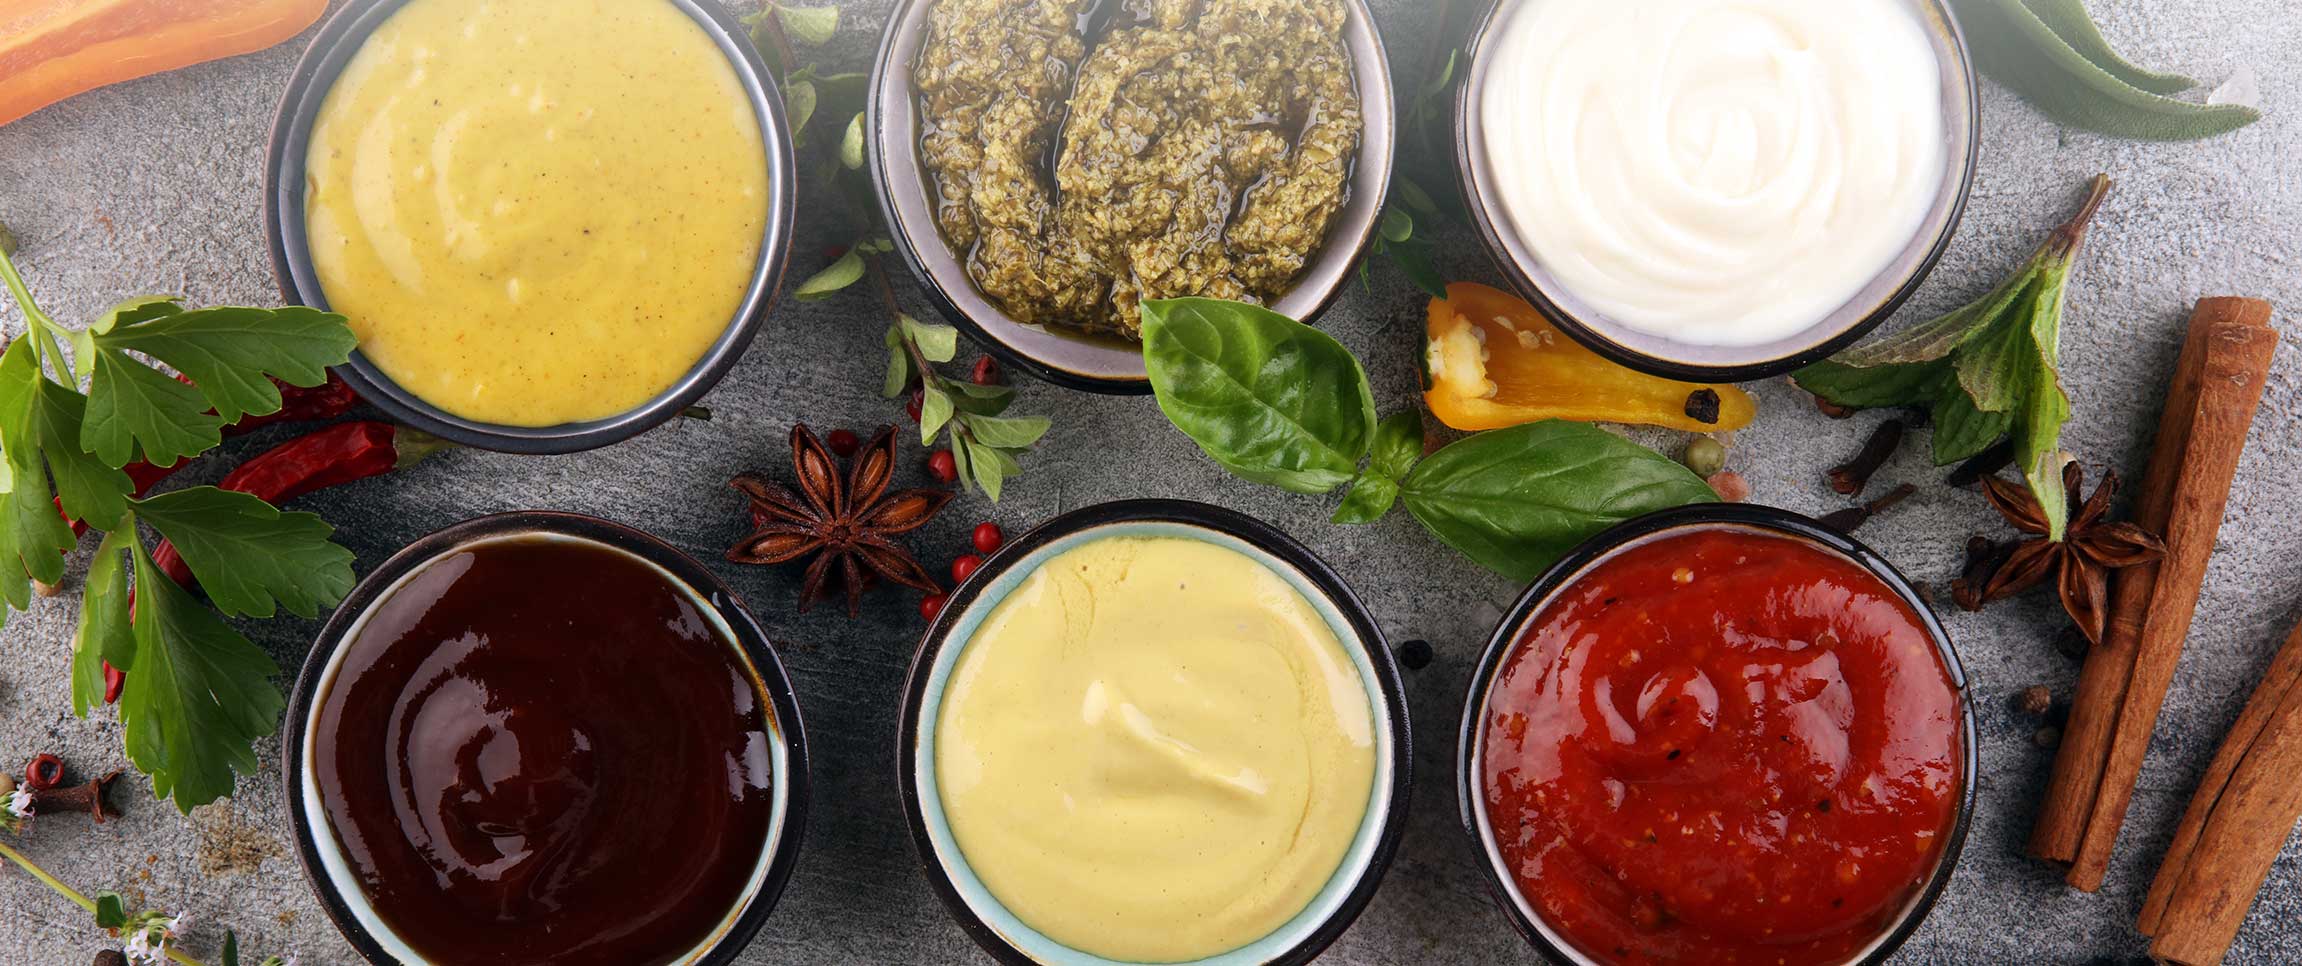 Signature Sauces and Dips to Lower Costs